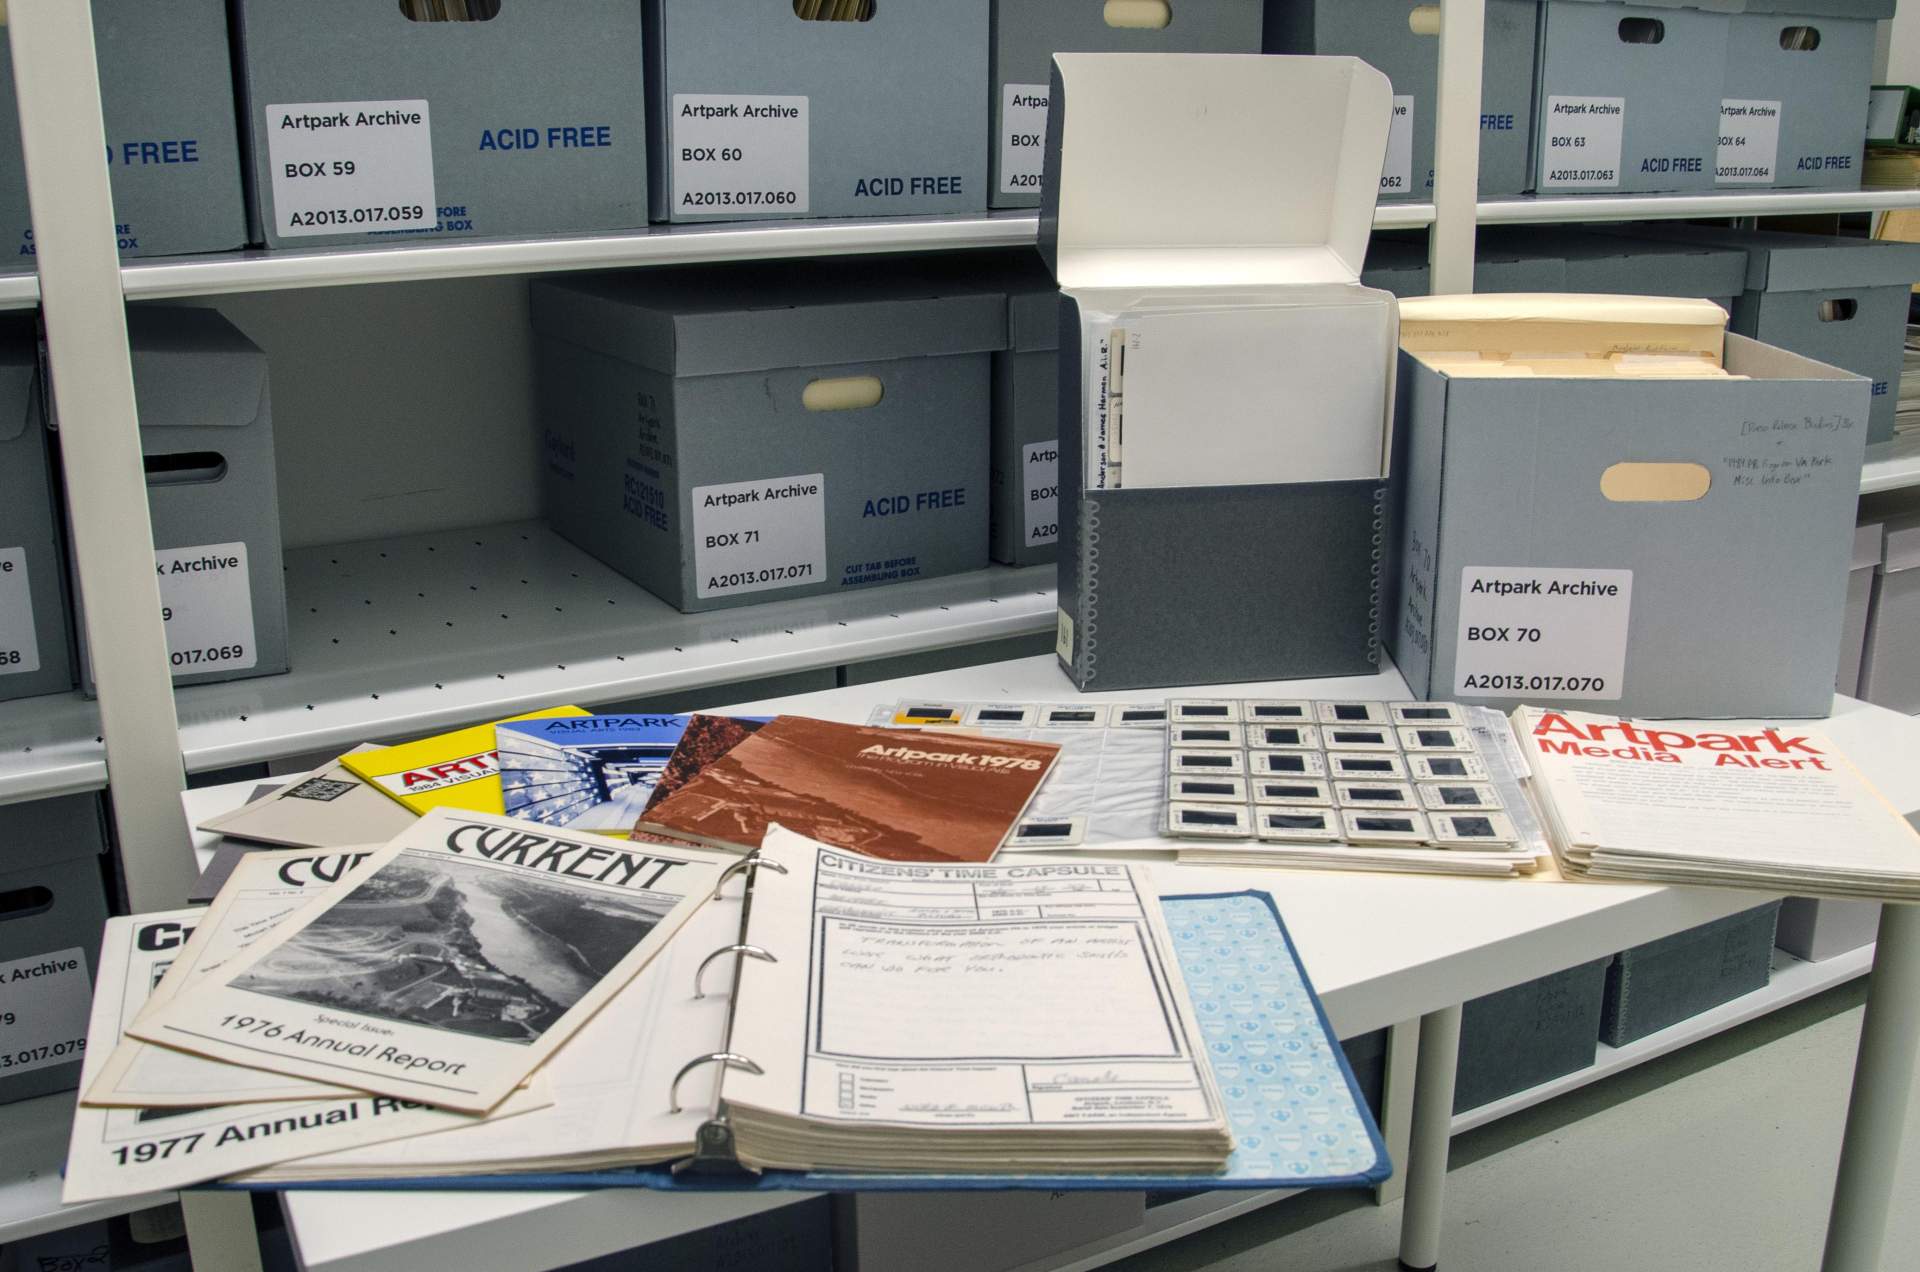 The Artpark Archival Collection at the Burchfield Penney Art Center is Now Available to Researchers